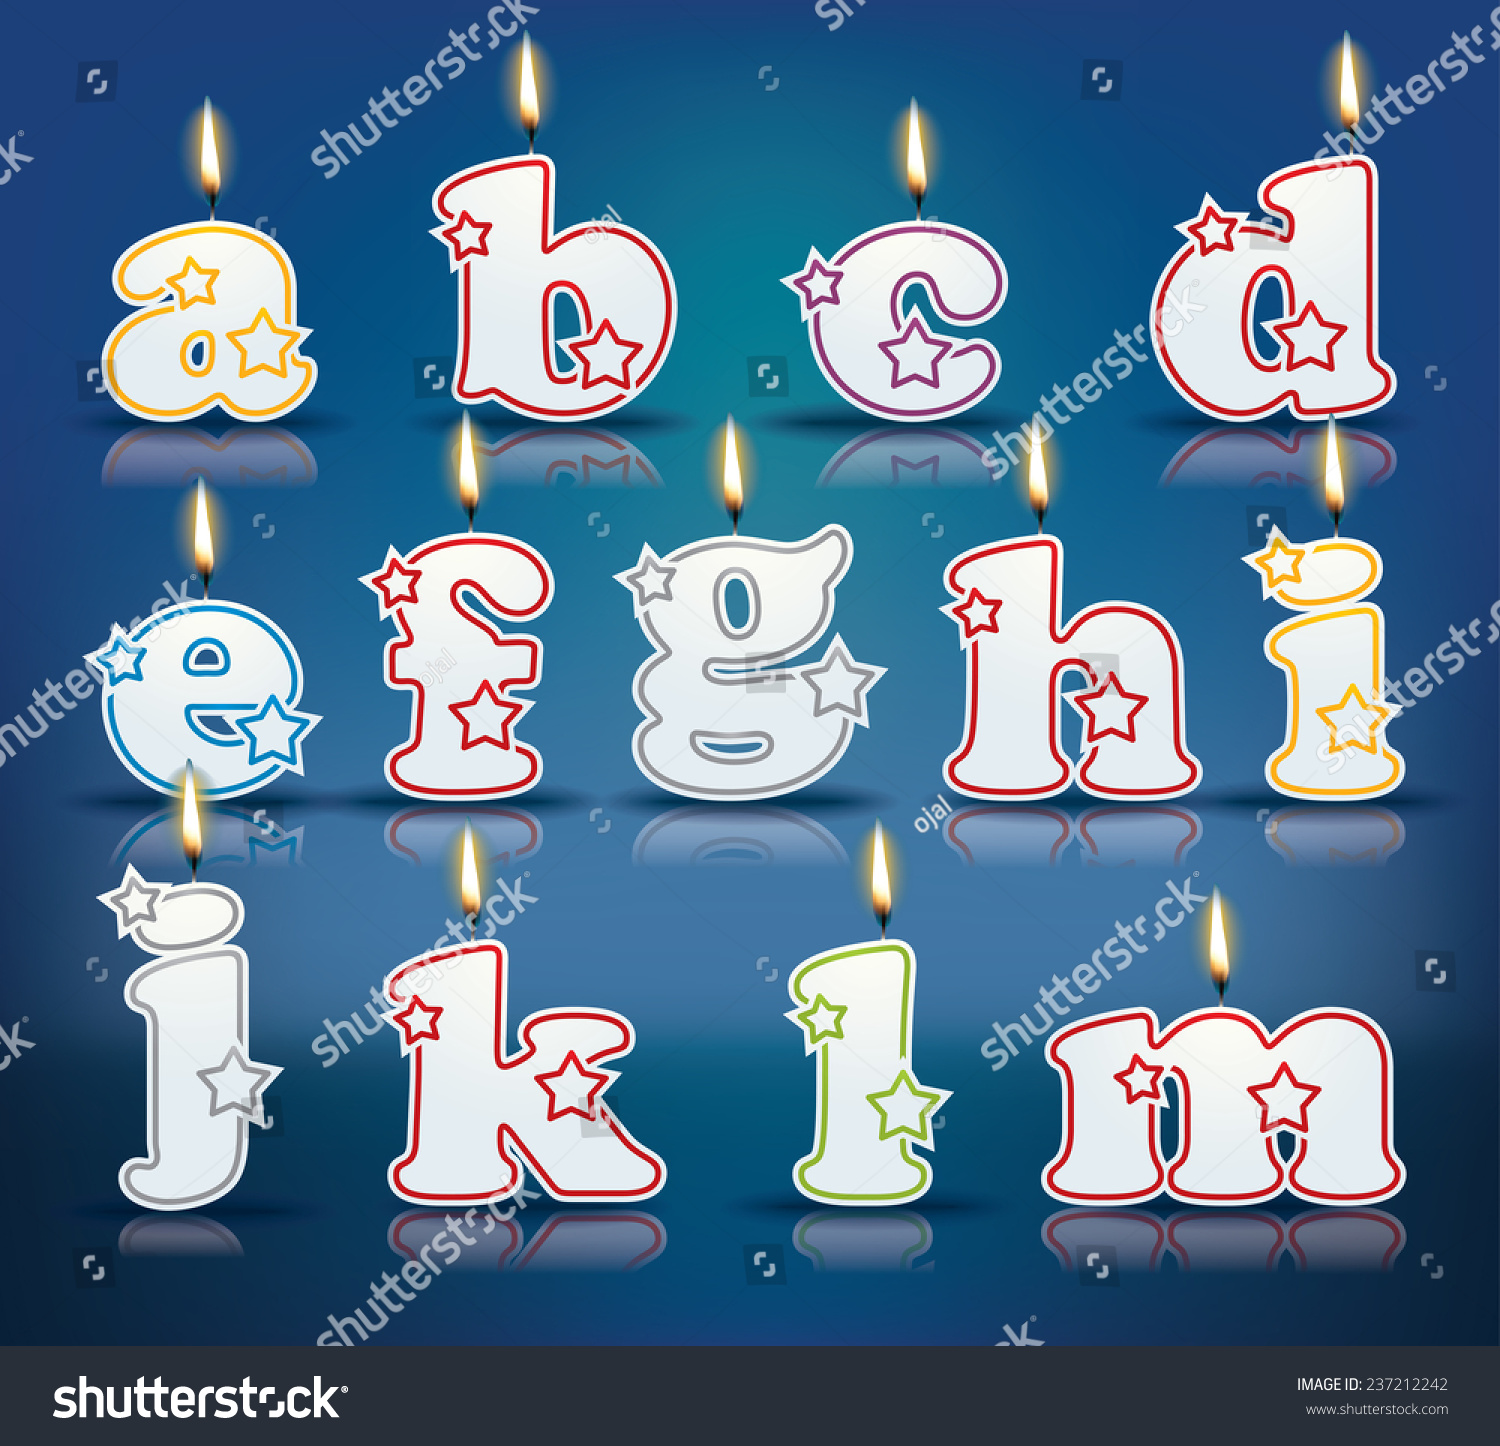 SVG of Candle letters from a to m with flames - eps 10 vector illustration svg